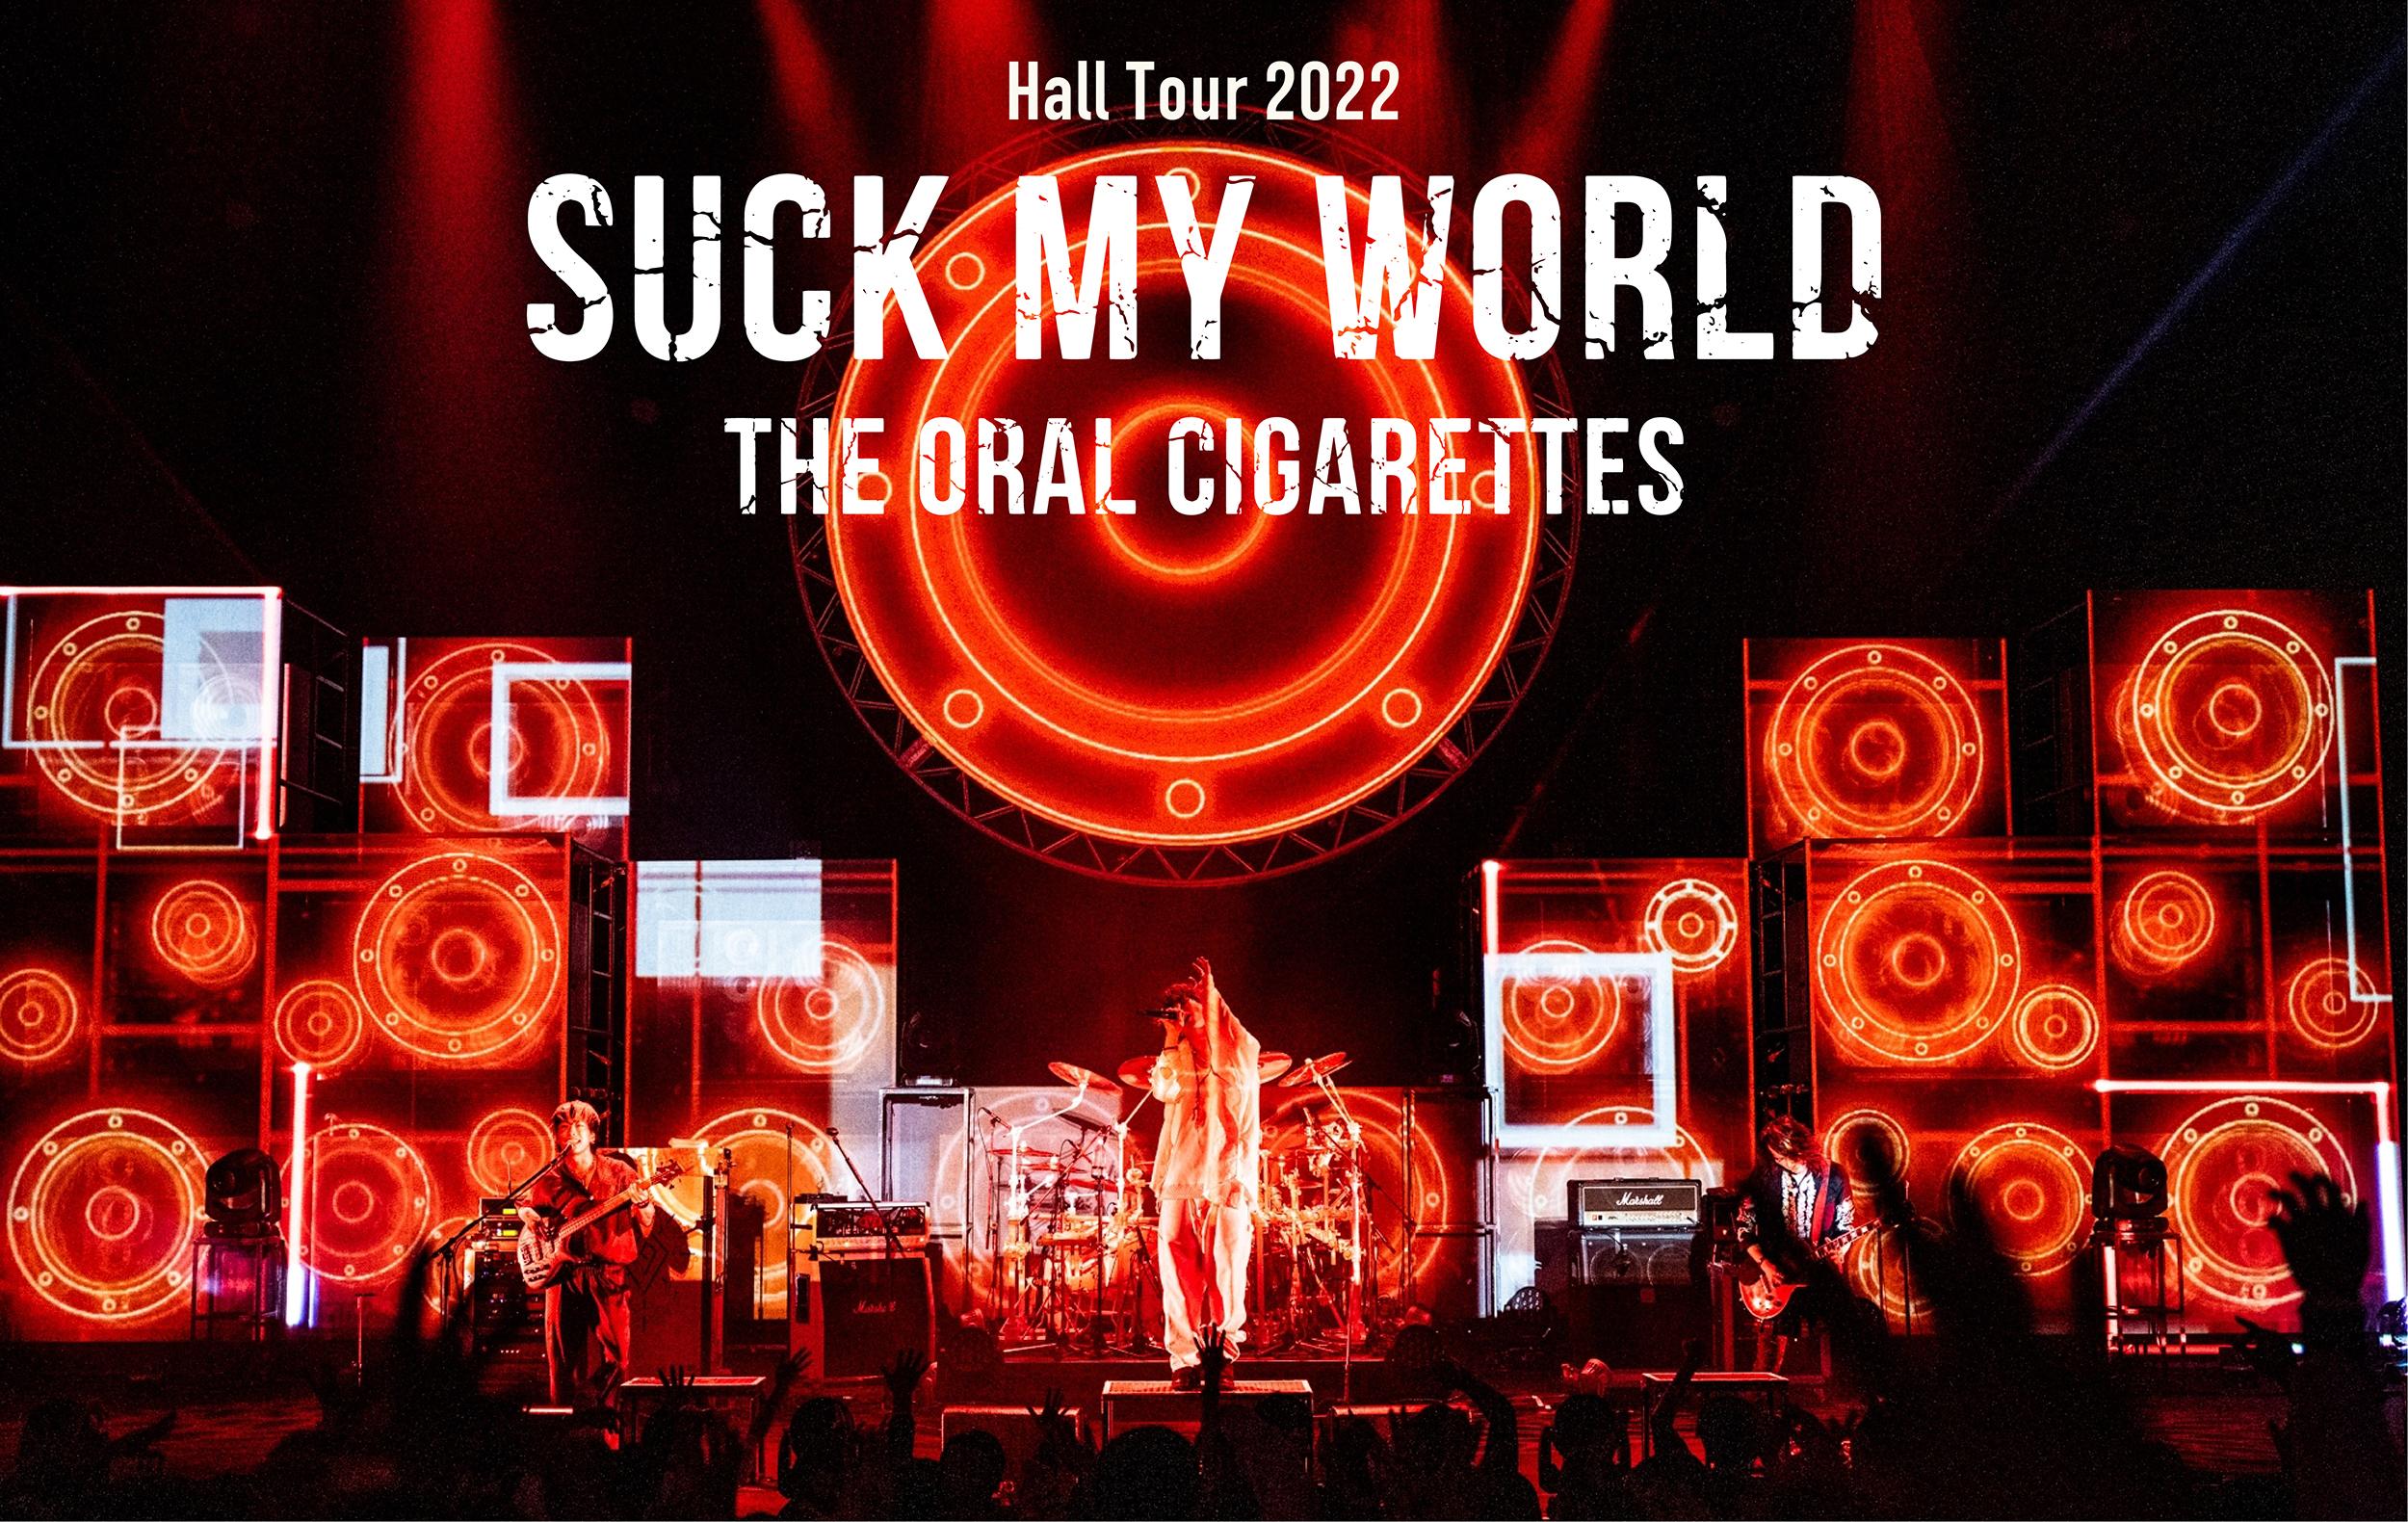 Hall Tour 2022「SUCK MY WORLD」演出解説配信の開催が決定！